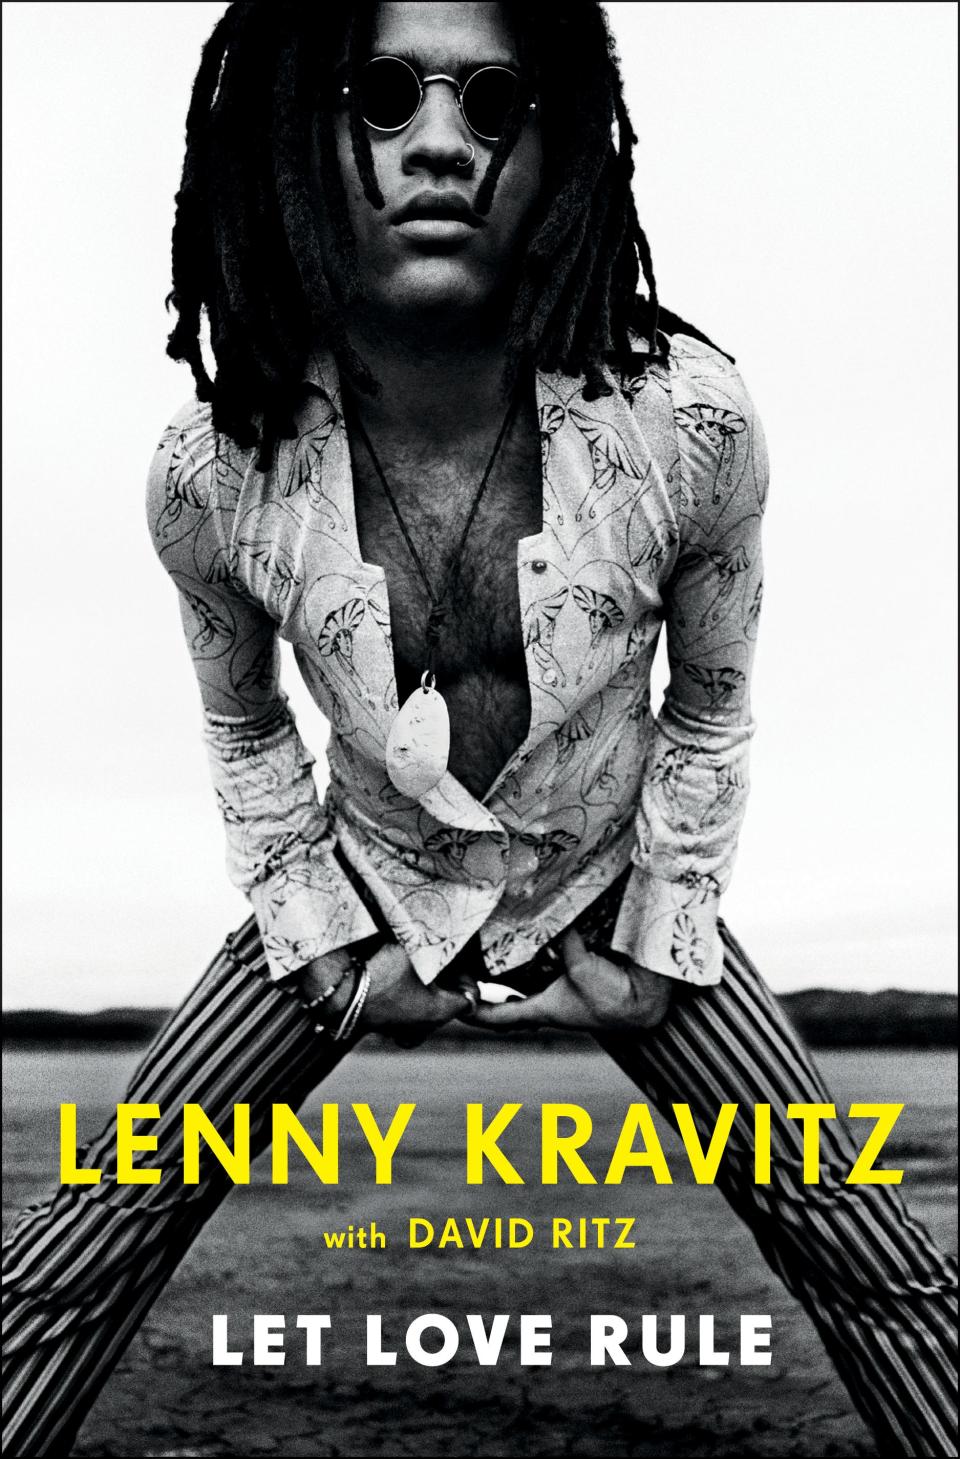 The cover of Lenny Kravitz's new memoir "Let Love Rule," out Tuesday.